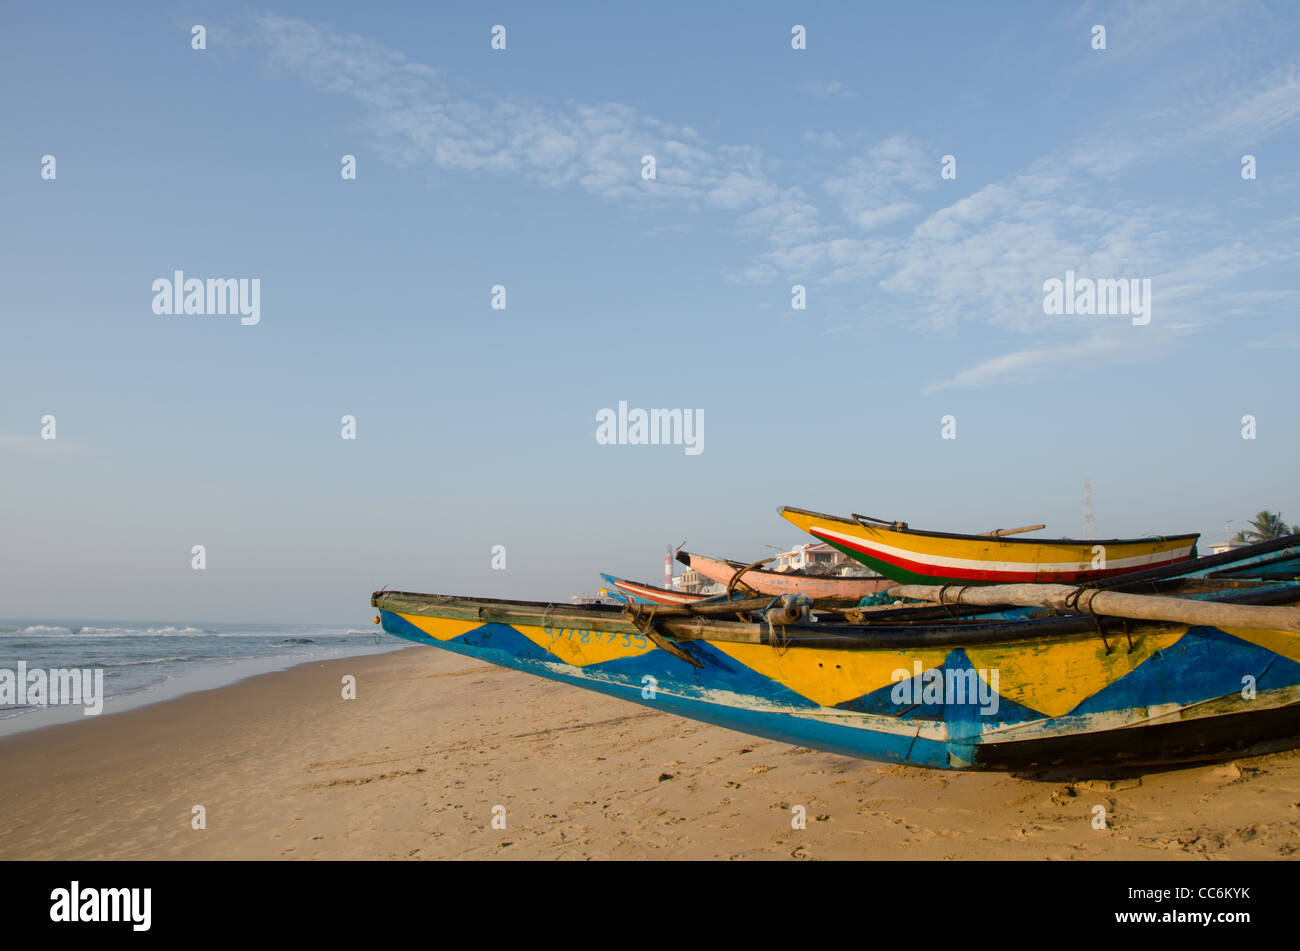 India, Odisha state, Puri, small boy on local colorful fishing boats -  SuperStock